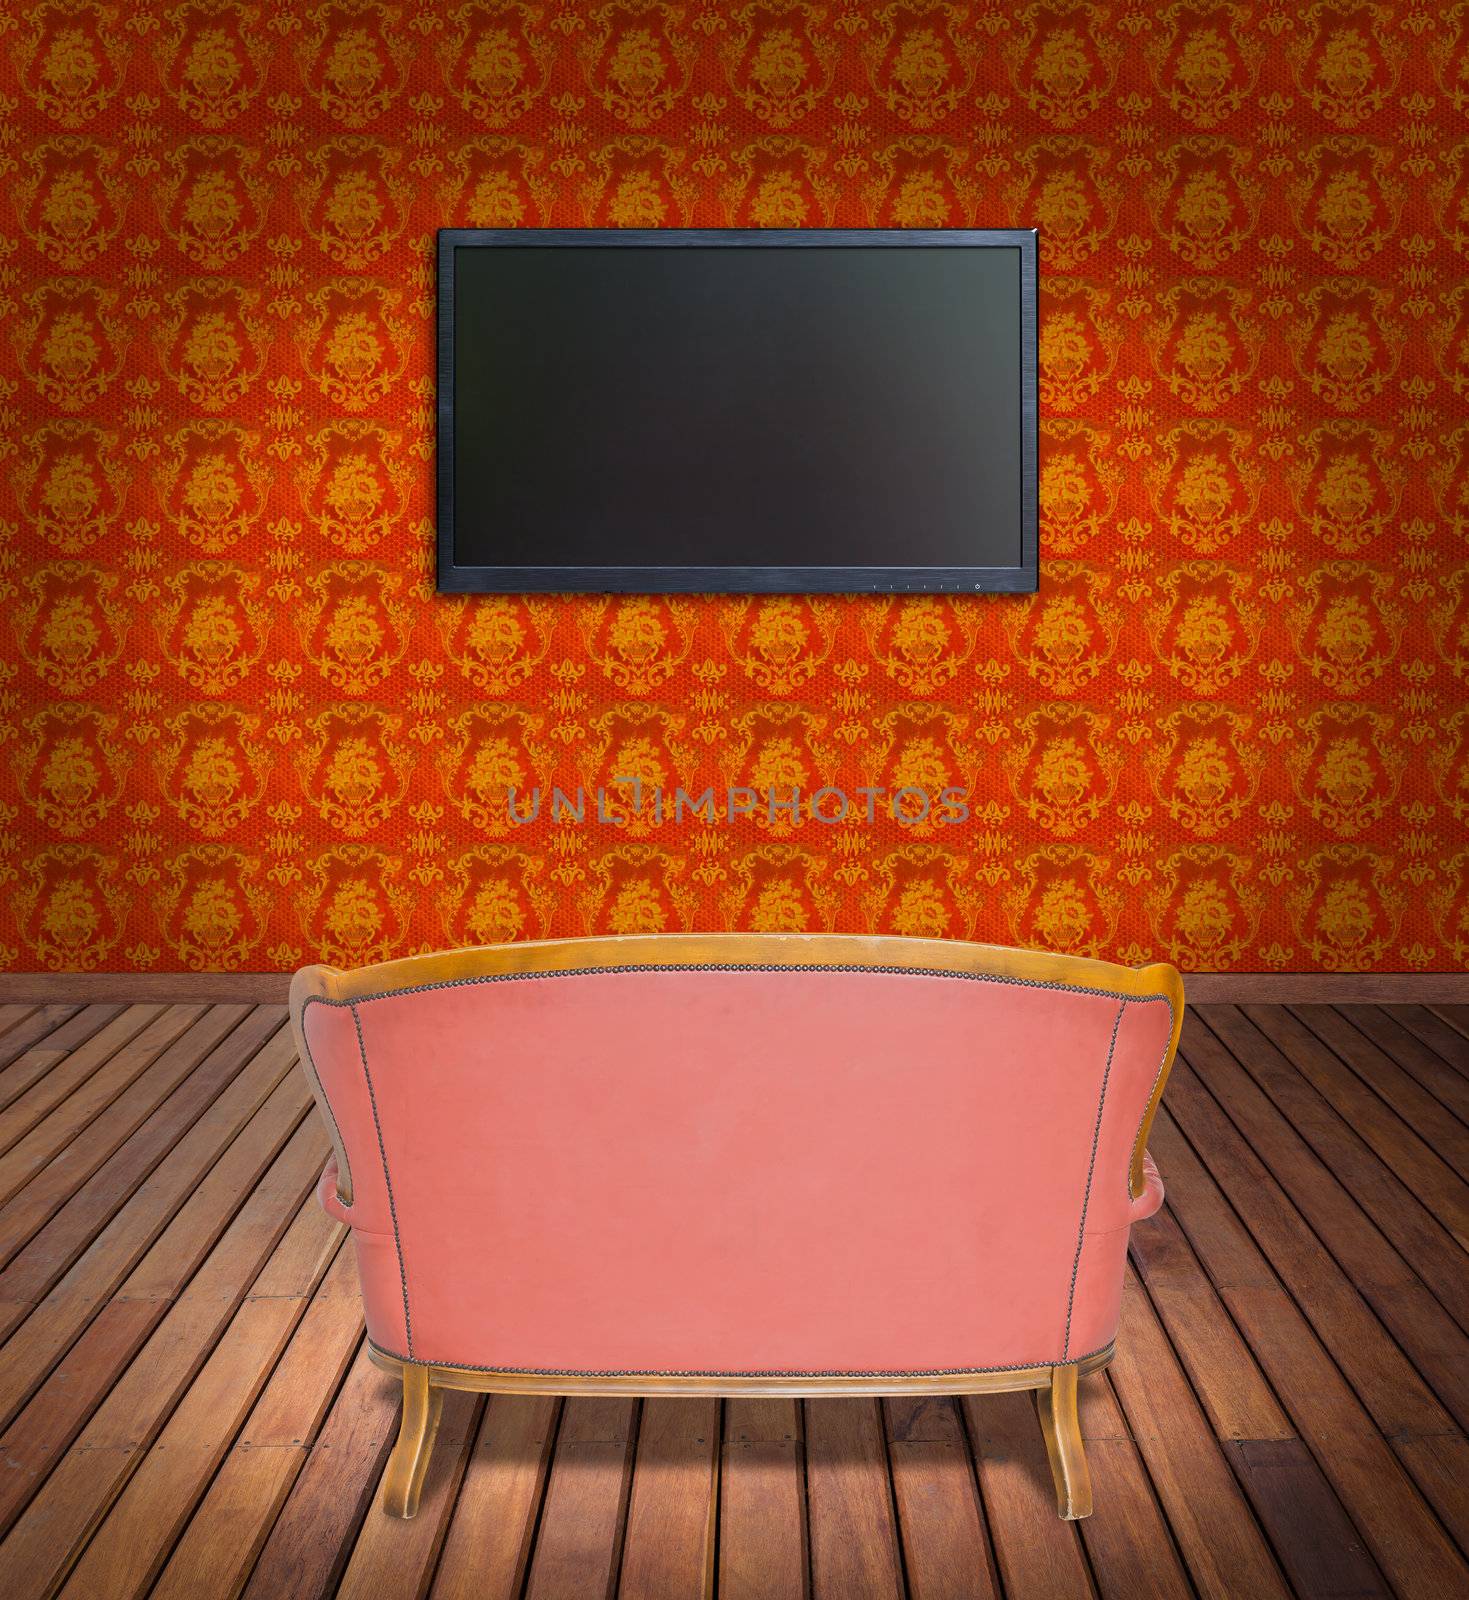 television and sofa in orange wallpaper room by tungphoto